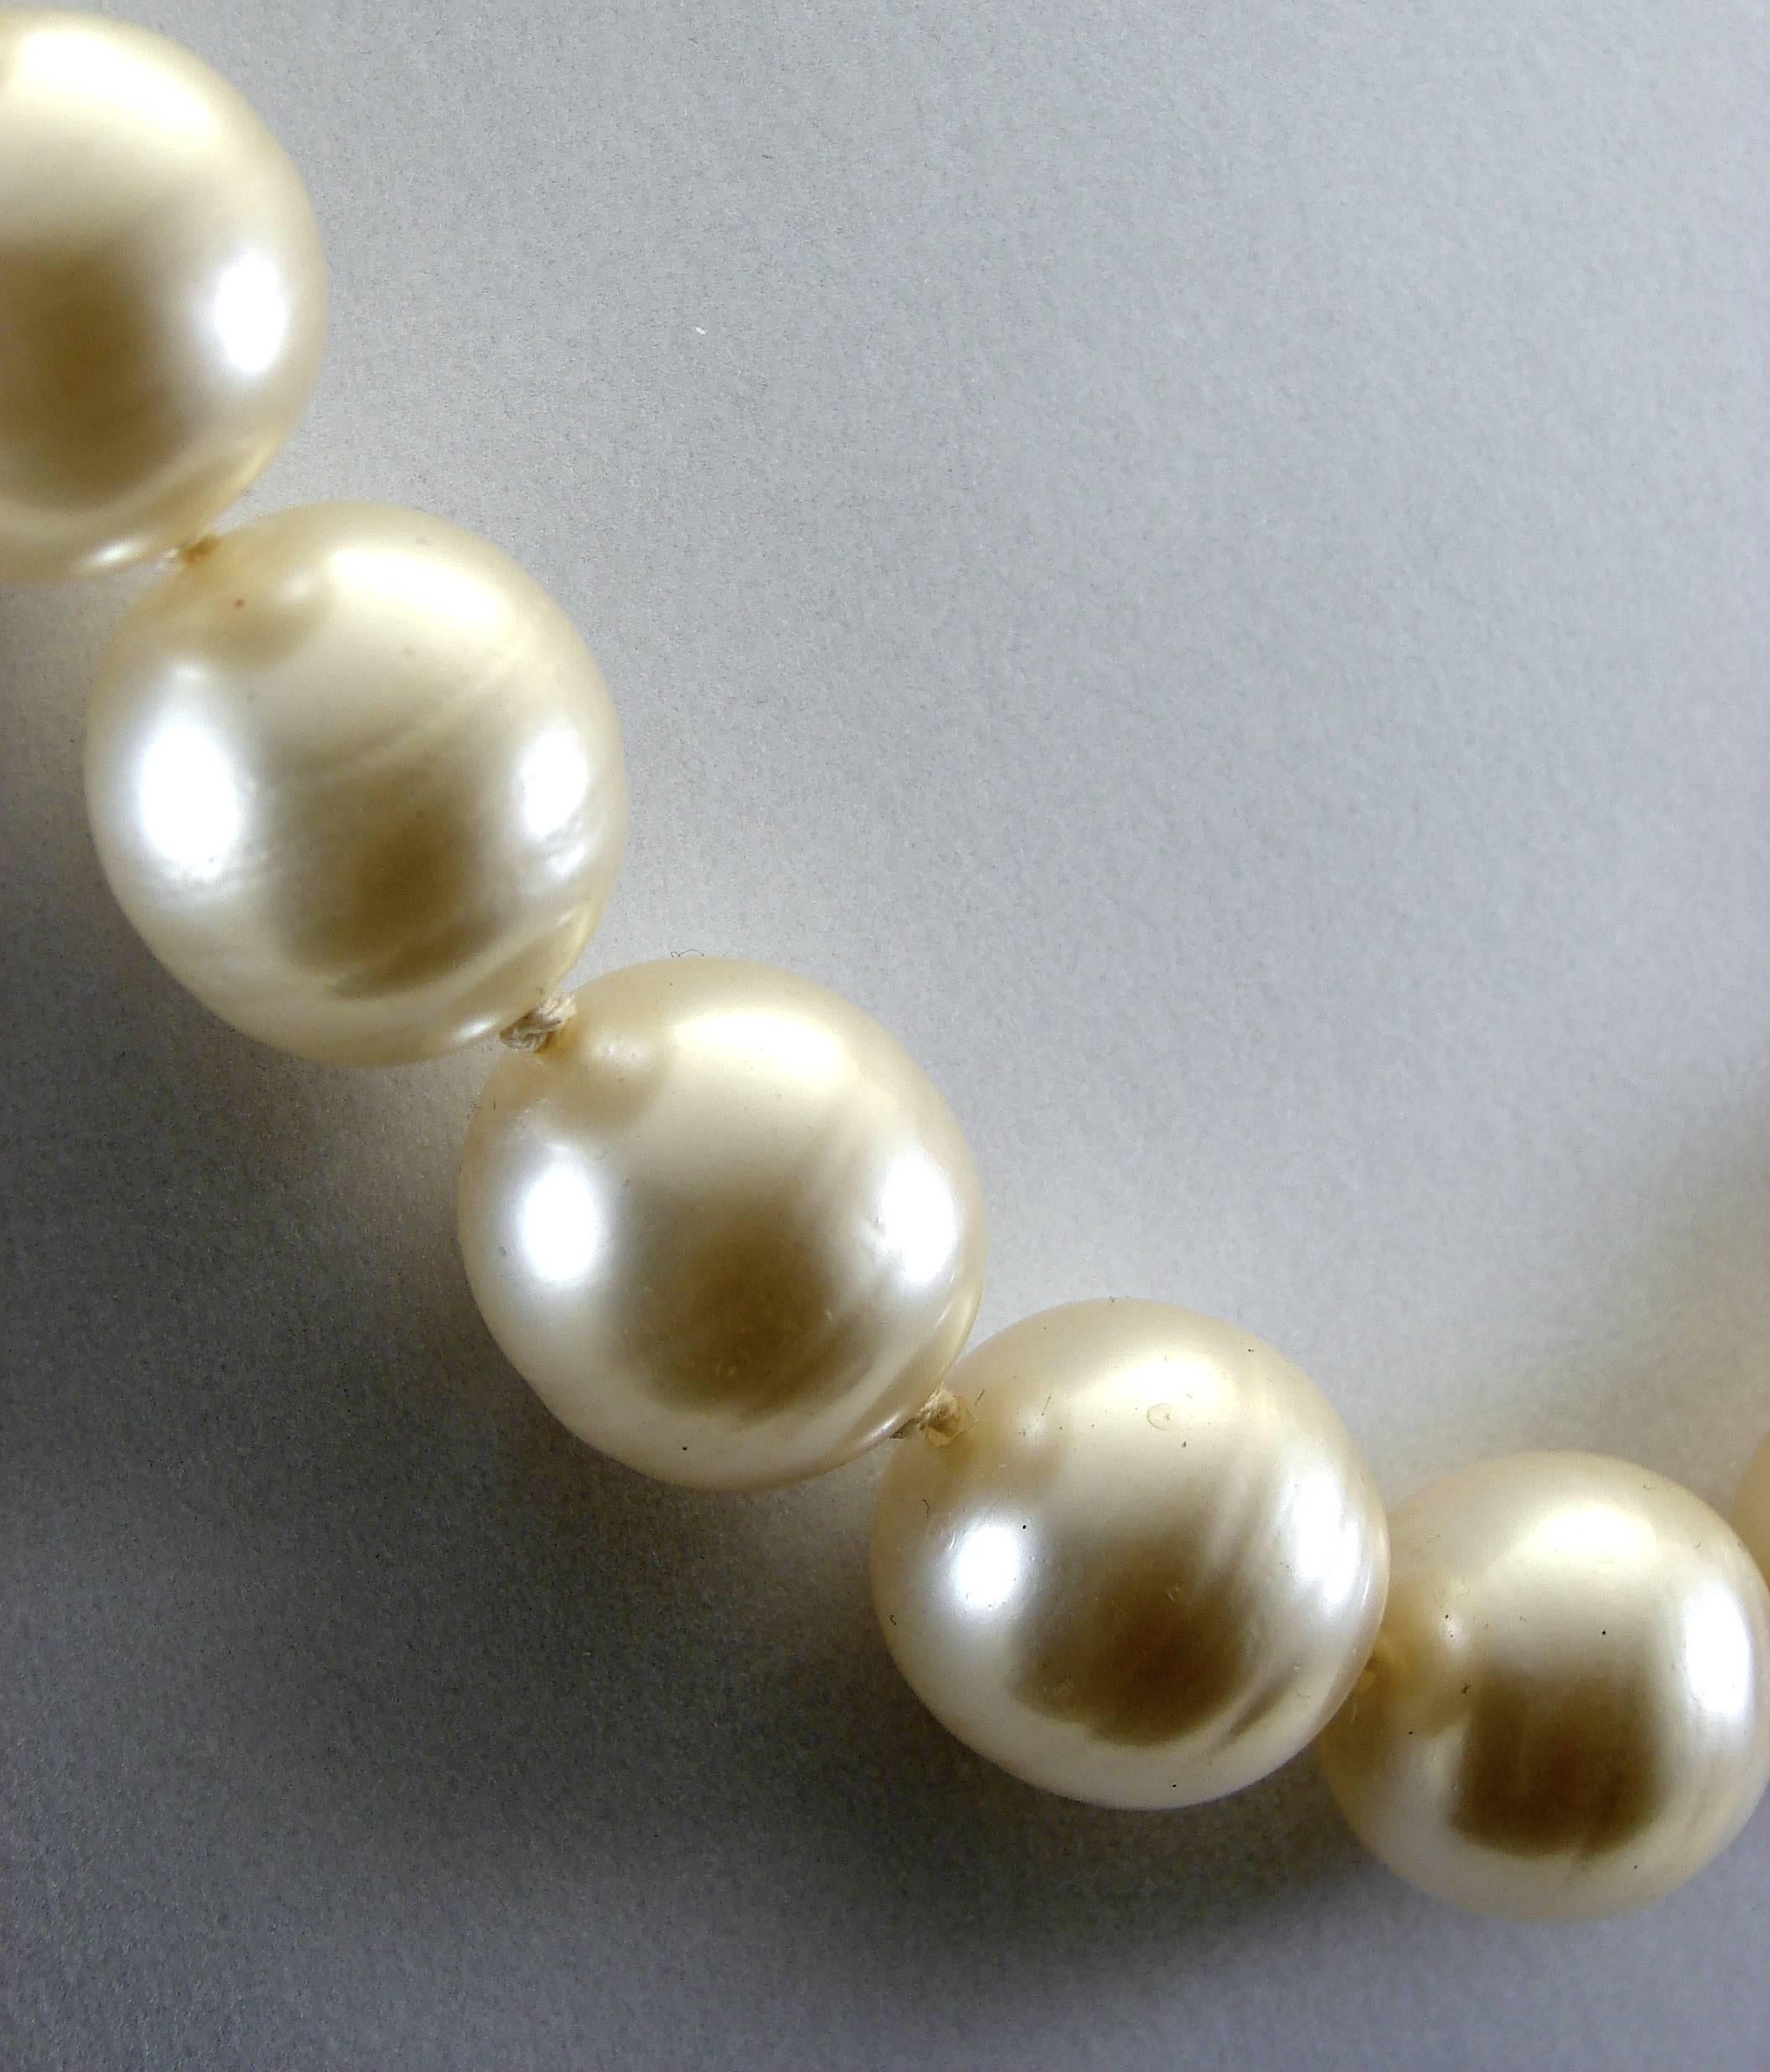 Chanel Choker Necklace Baroque Pearls Poured Glass 90s Season 2 9  1